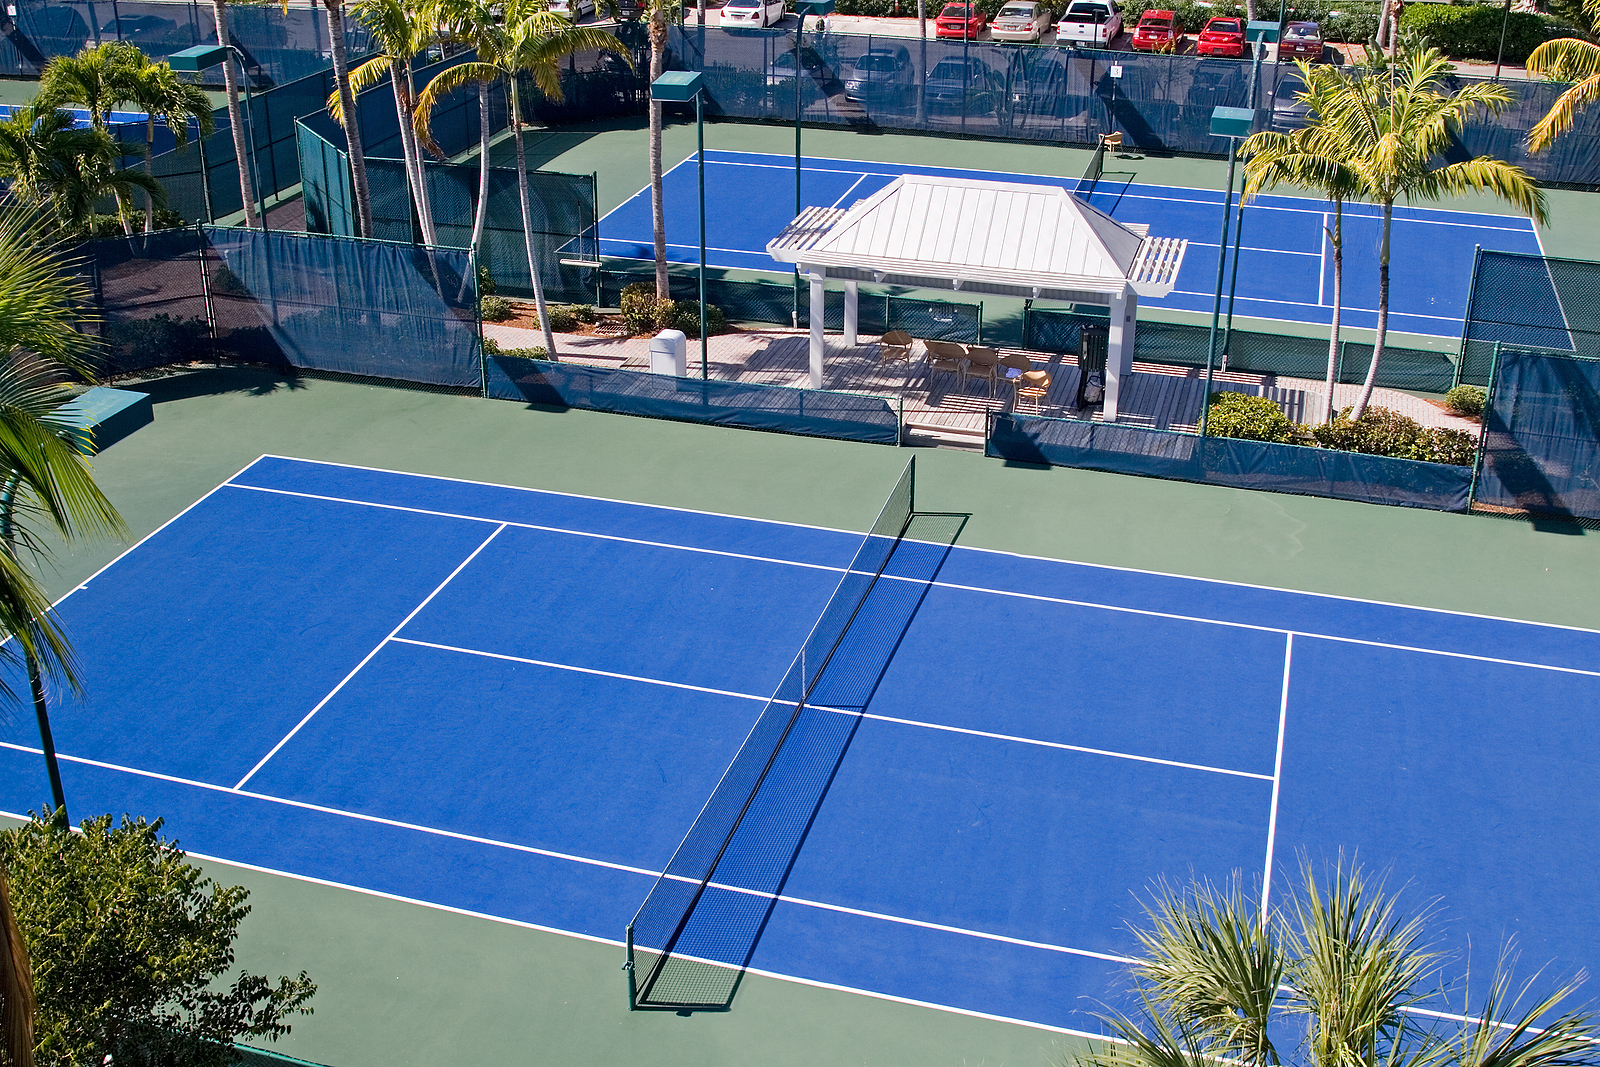 What's the Difference Between Pickleball and Tennis?